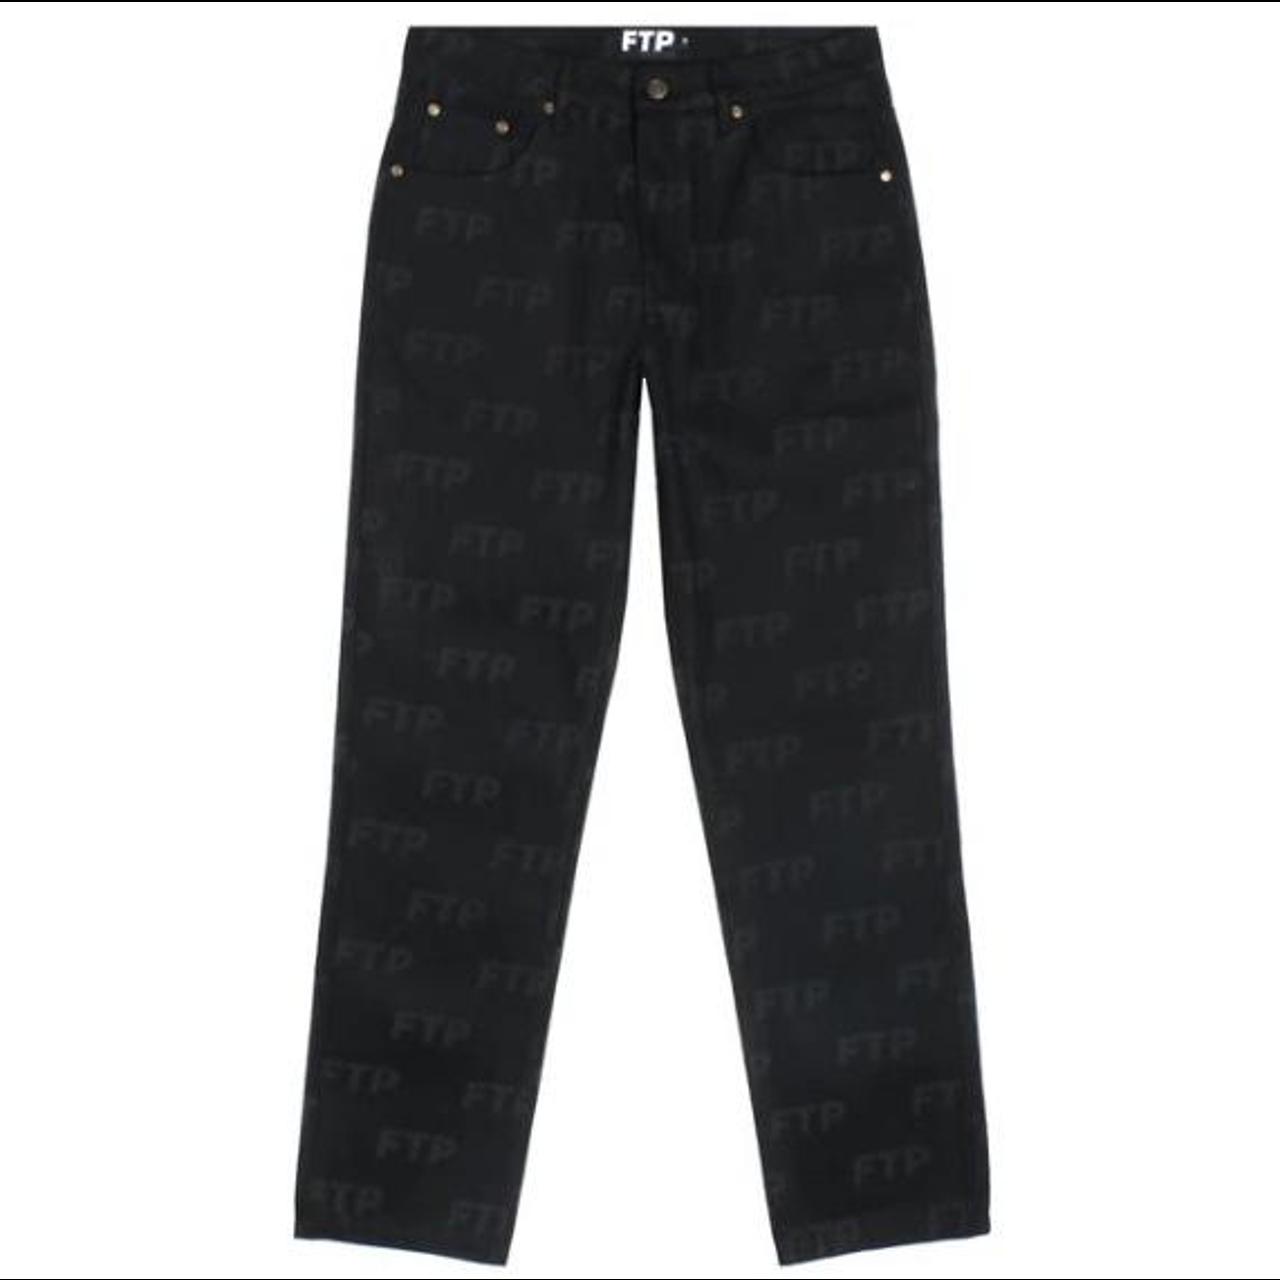 Product Image 4 - FTP all over print Jeans